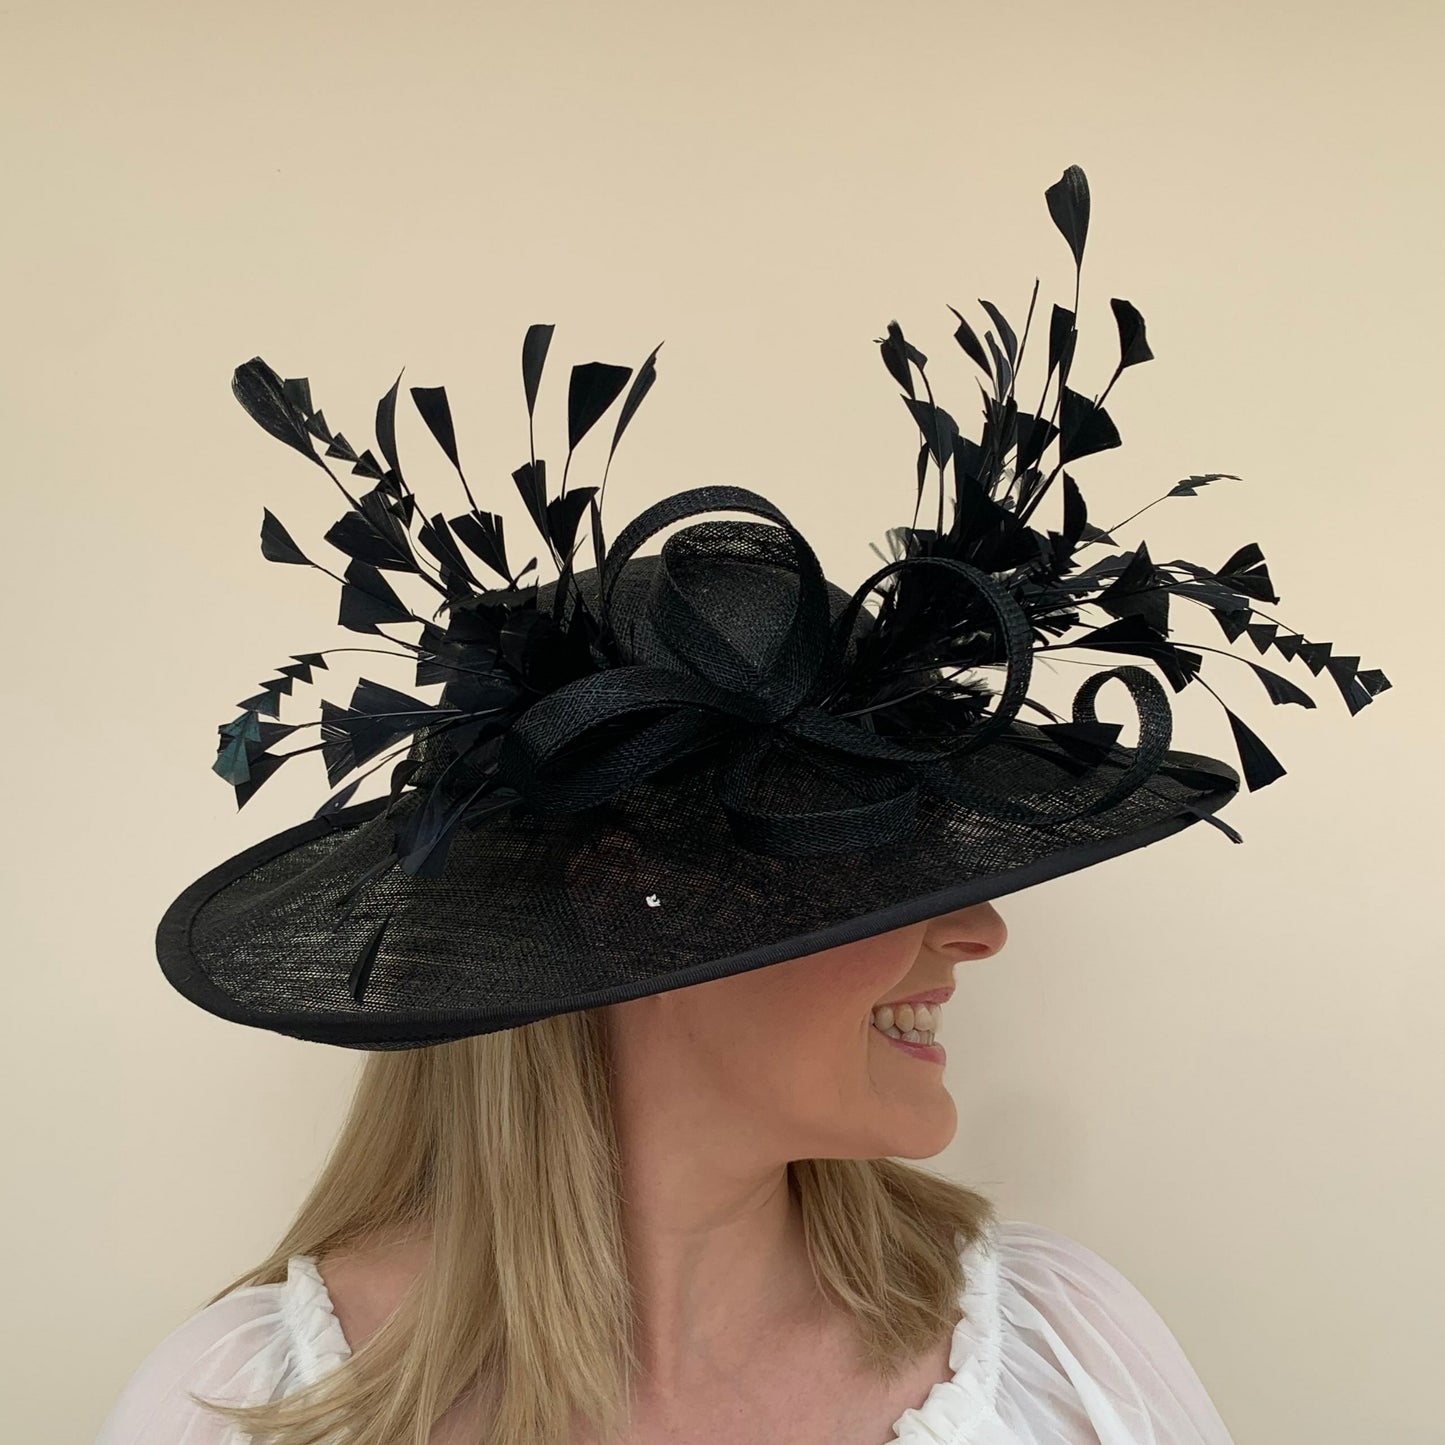 J Bees JB23/284 Large Hatinator with Feathers in Black Black